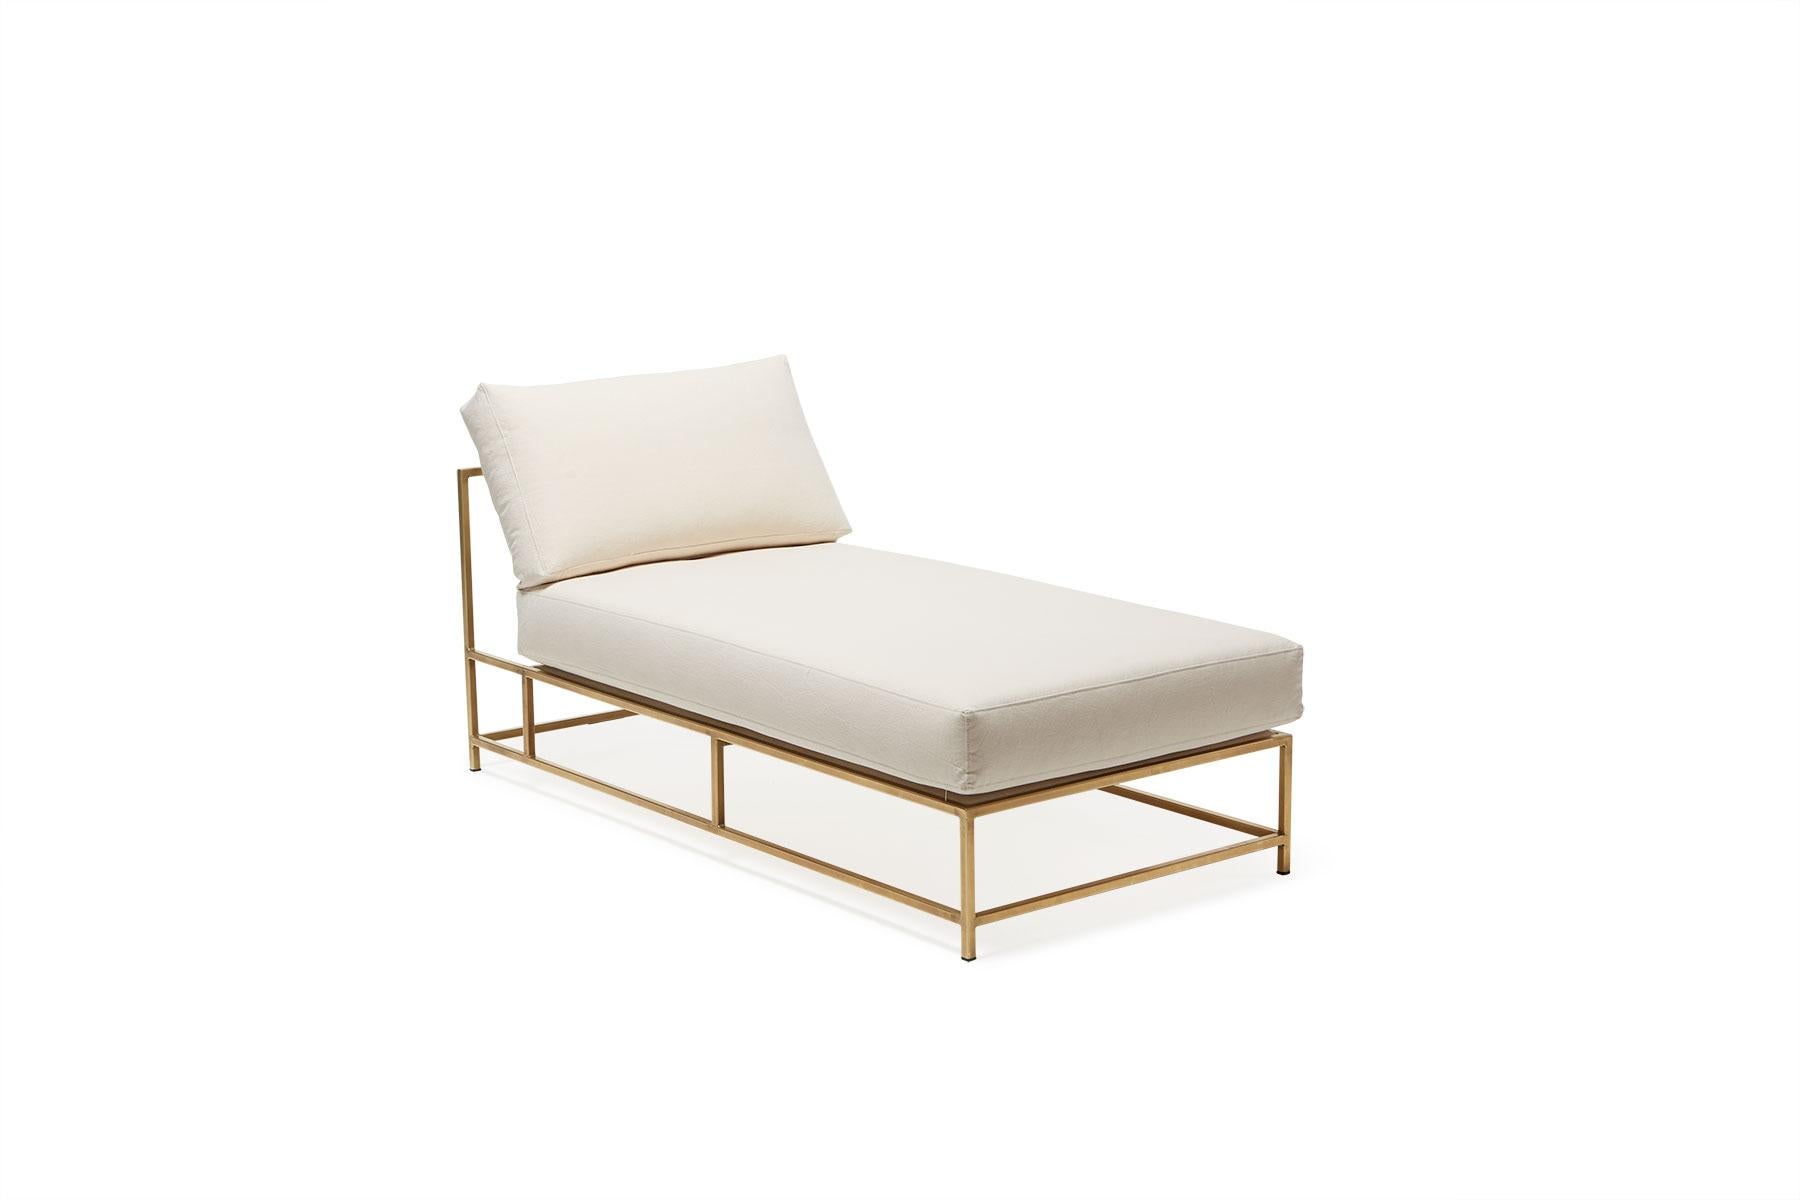 The Inheritance Chaise Lounge by Stephen Kenn is as comfortable as it is unique. The design features an exposed construction composed of three elements - a steel frame, plush upholstery, and supportive belts. The deep seating area is perfect for a